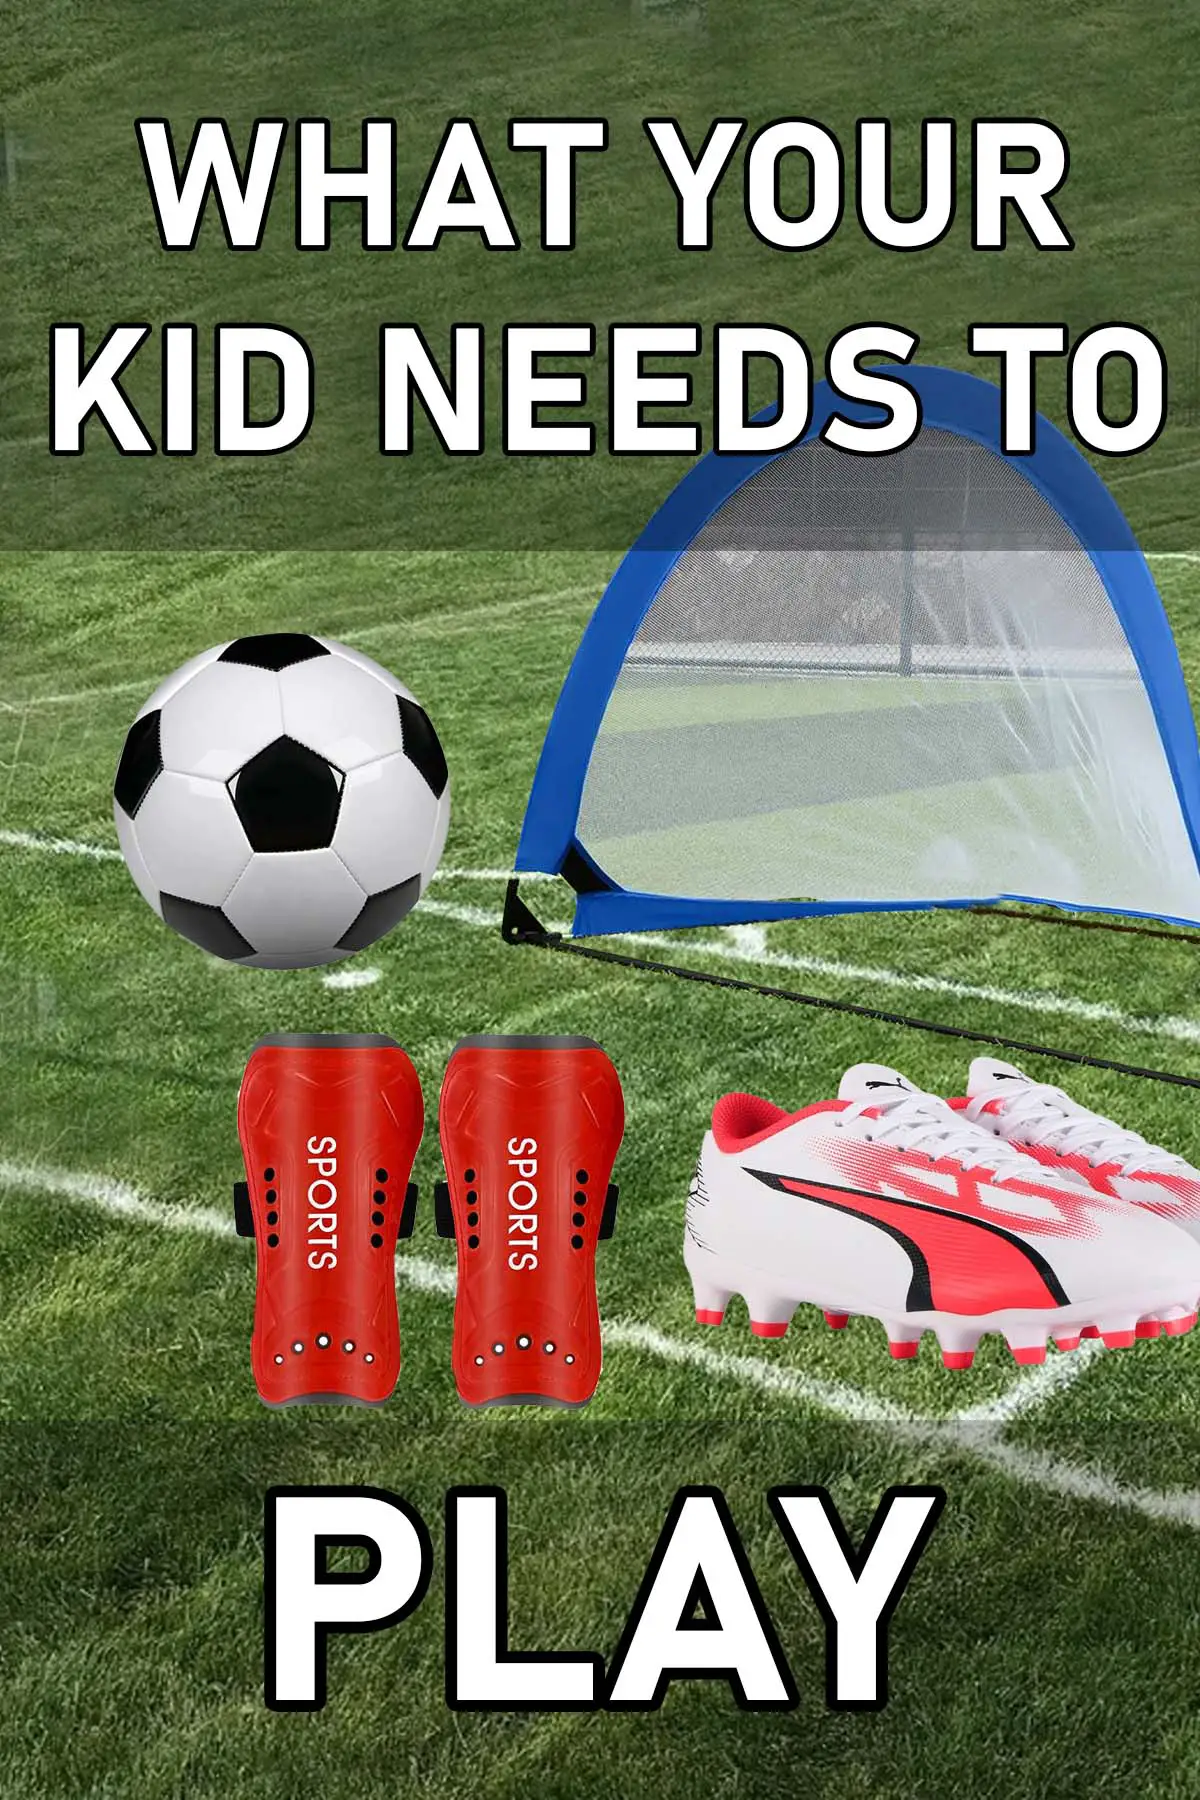 10 items needed for playing kids soccer. The must have and helpful soccer gear for kids. Useful list of what you need for youth soccer equipment